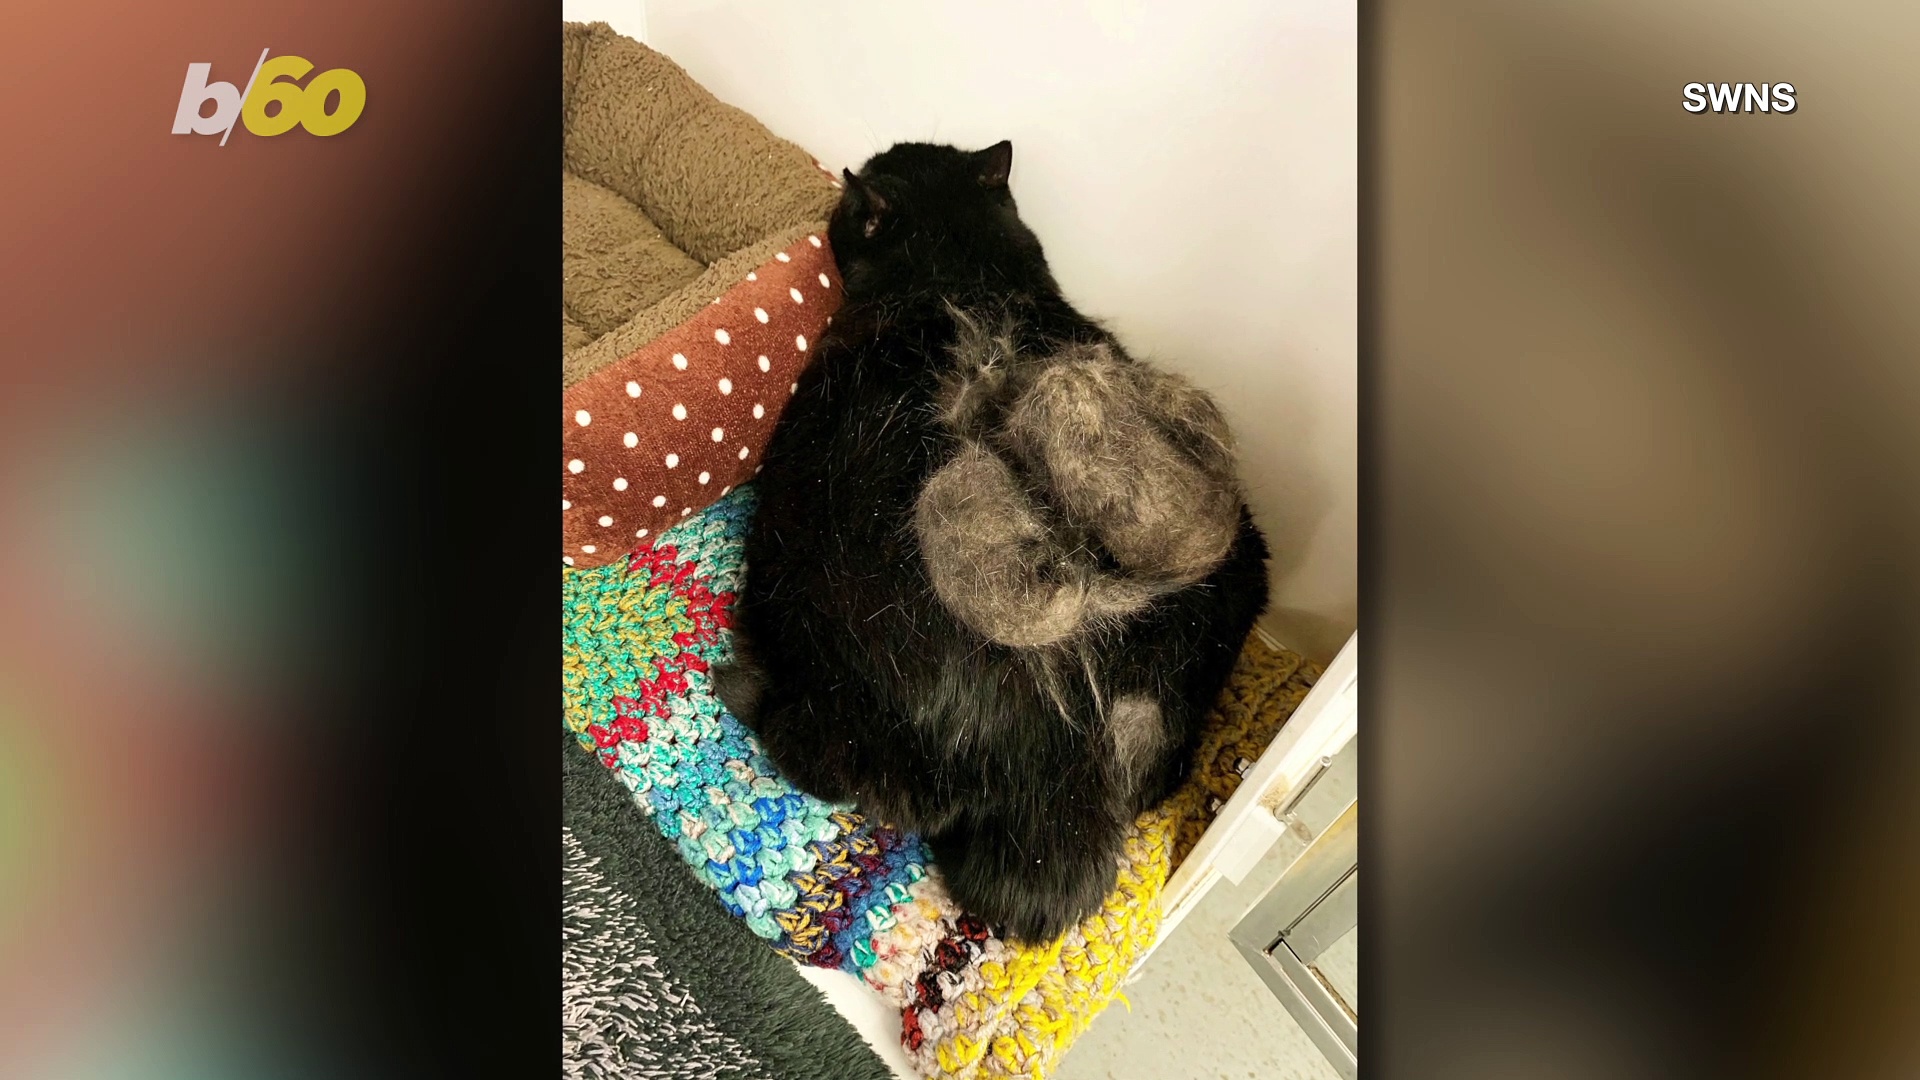 RSPCA Rescued Obese Cat With Large Lump That Turned Out to Be Matted Fur